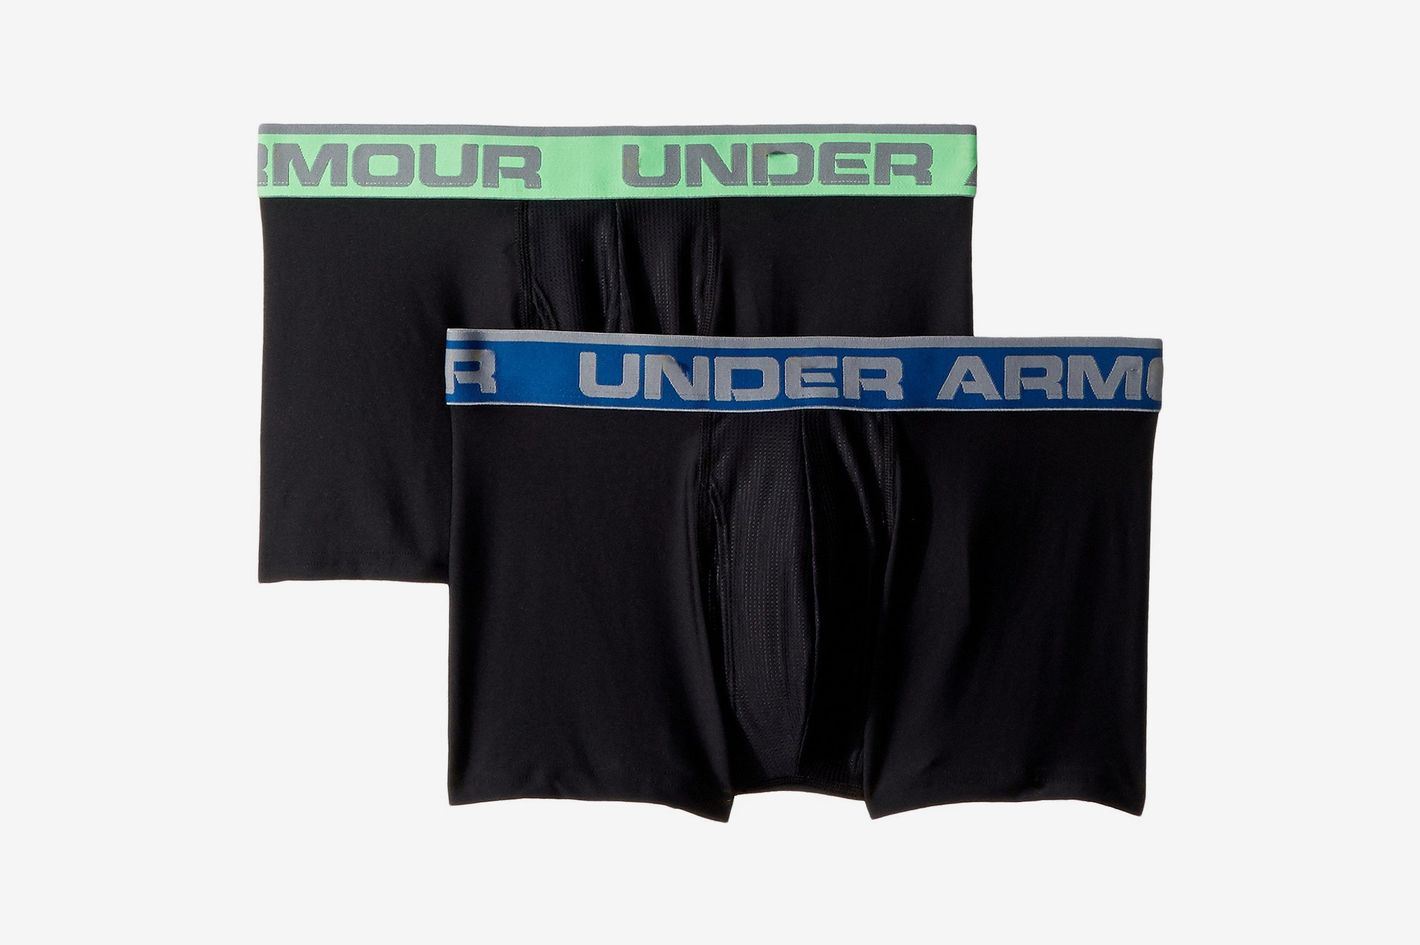 Best Workout Underwear For Your Next Gym Session